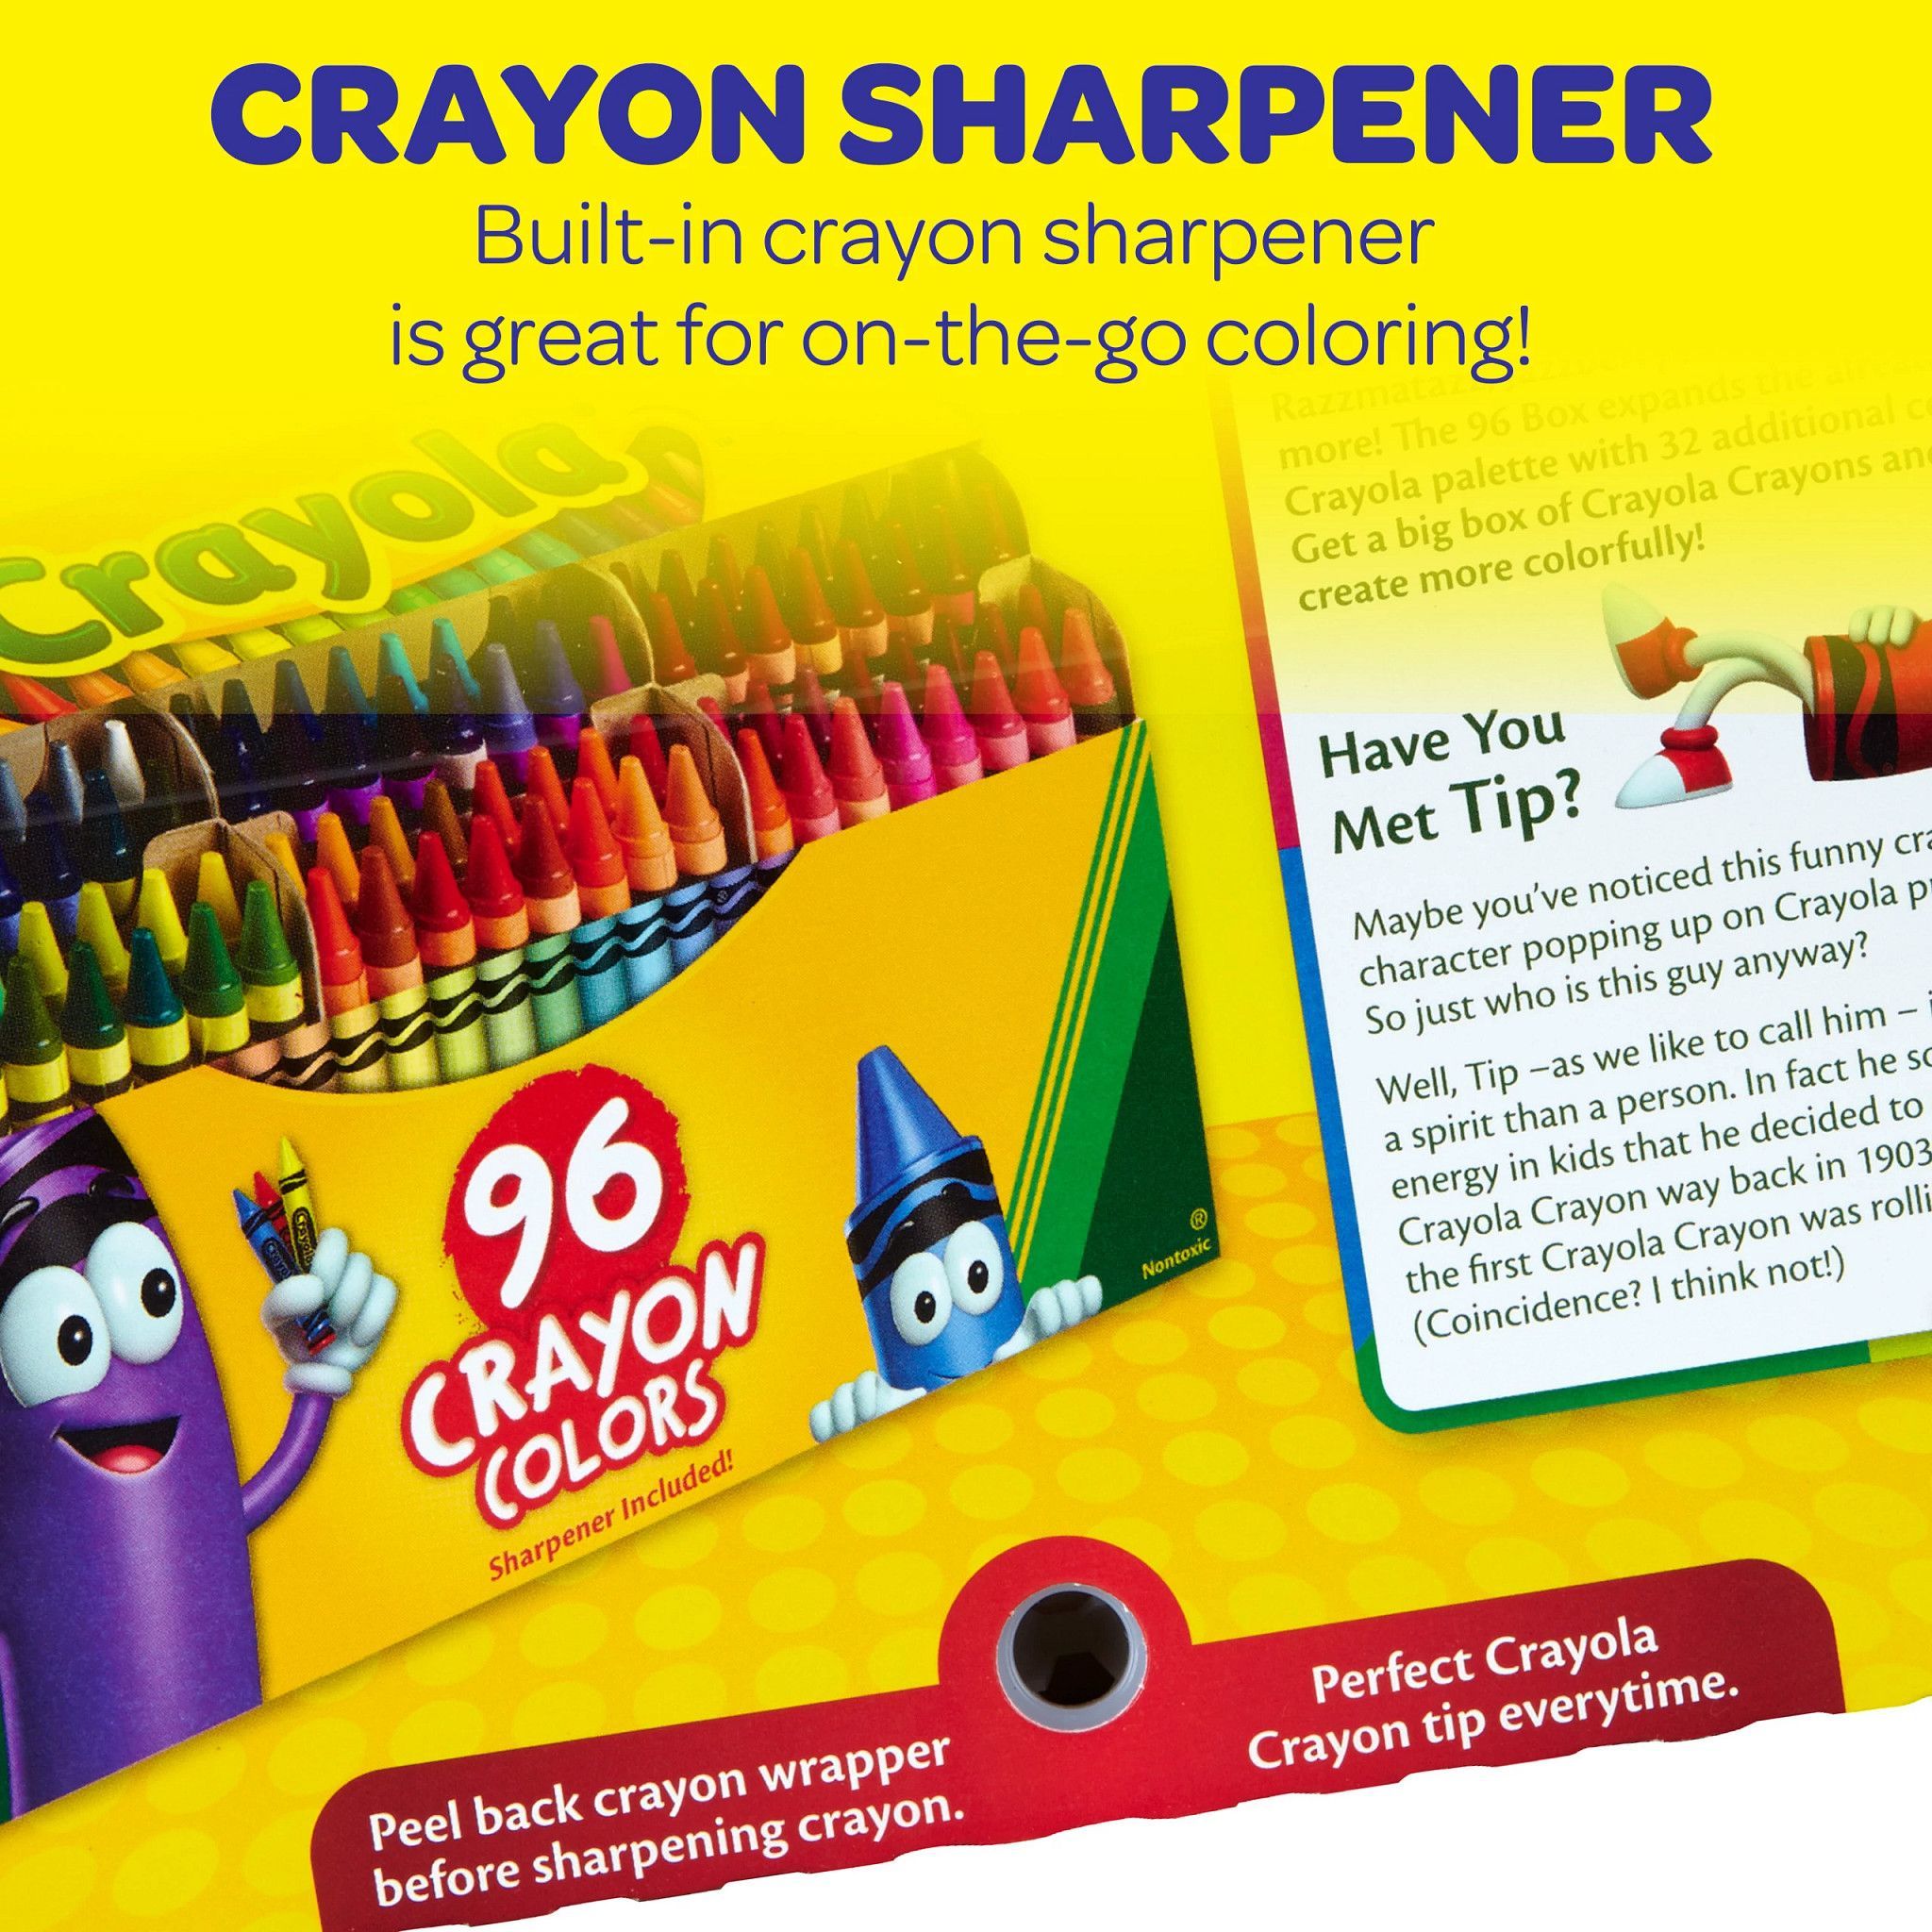 Crayola Crayon Set, 96-Colors, School Supplies, Art Gifts for Kids - image 5 of 12